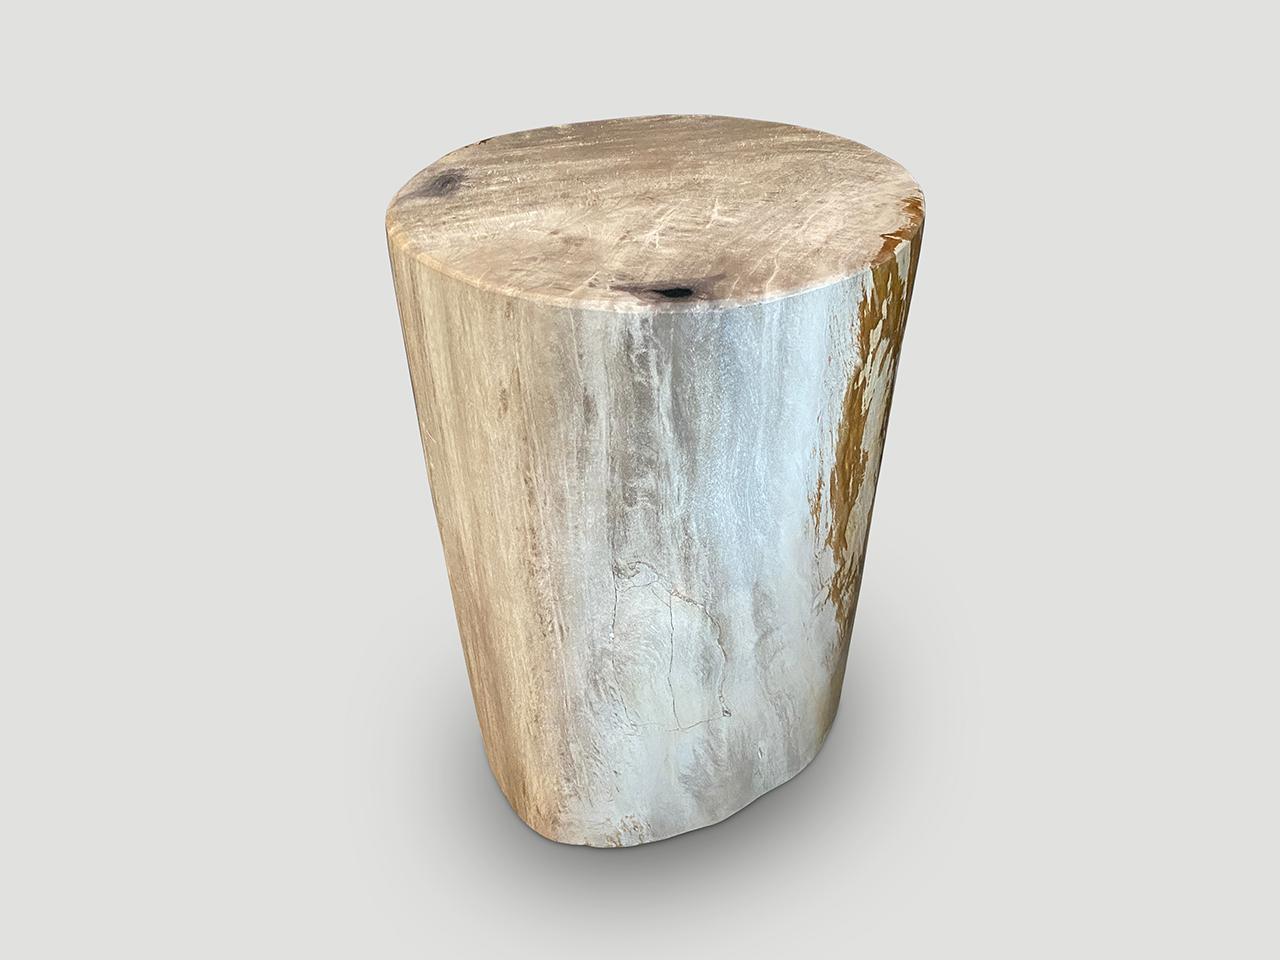 Beautiful petrified wood side table. It’s fascinating how Mother Nature produces these stunning 40 million year old petrified teak logs with such contrasting colors and natural patterns throughout. Modern yet with so much history.

As with a